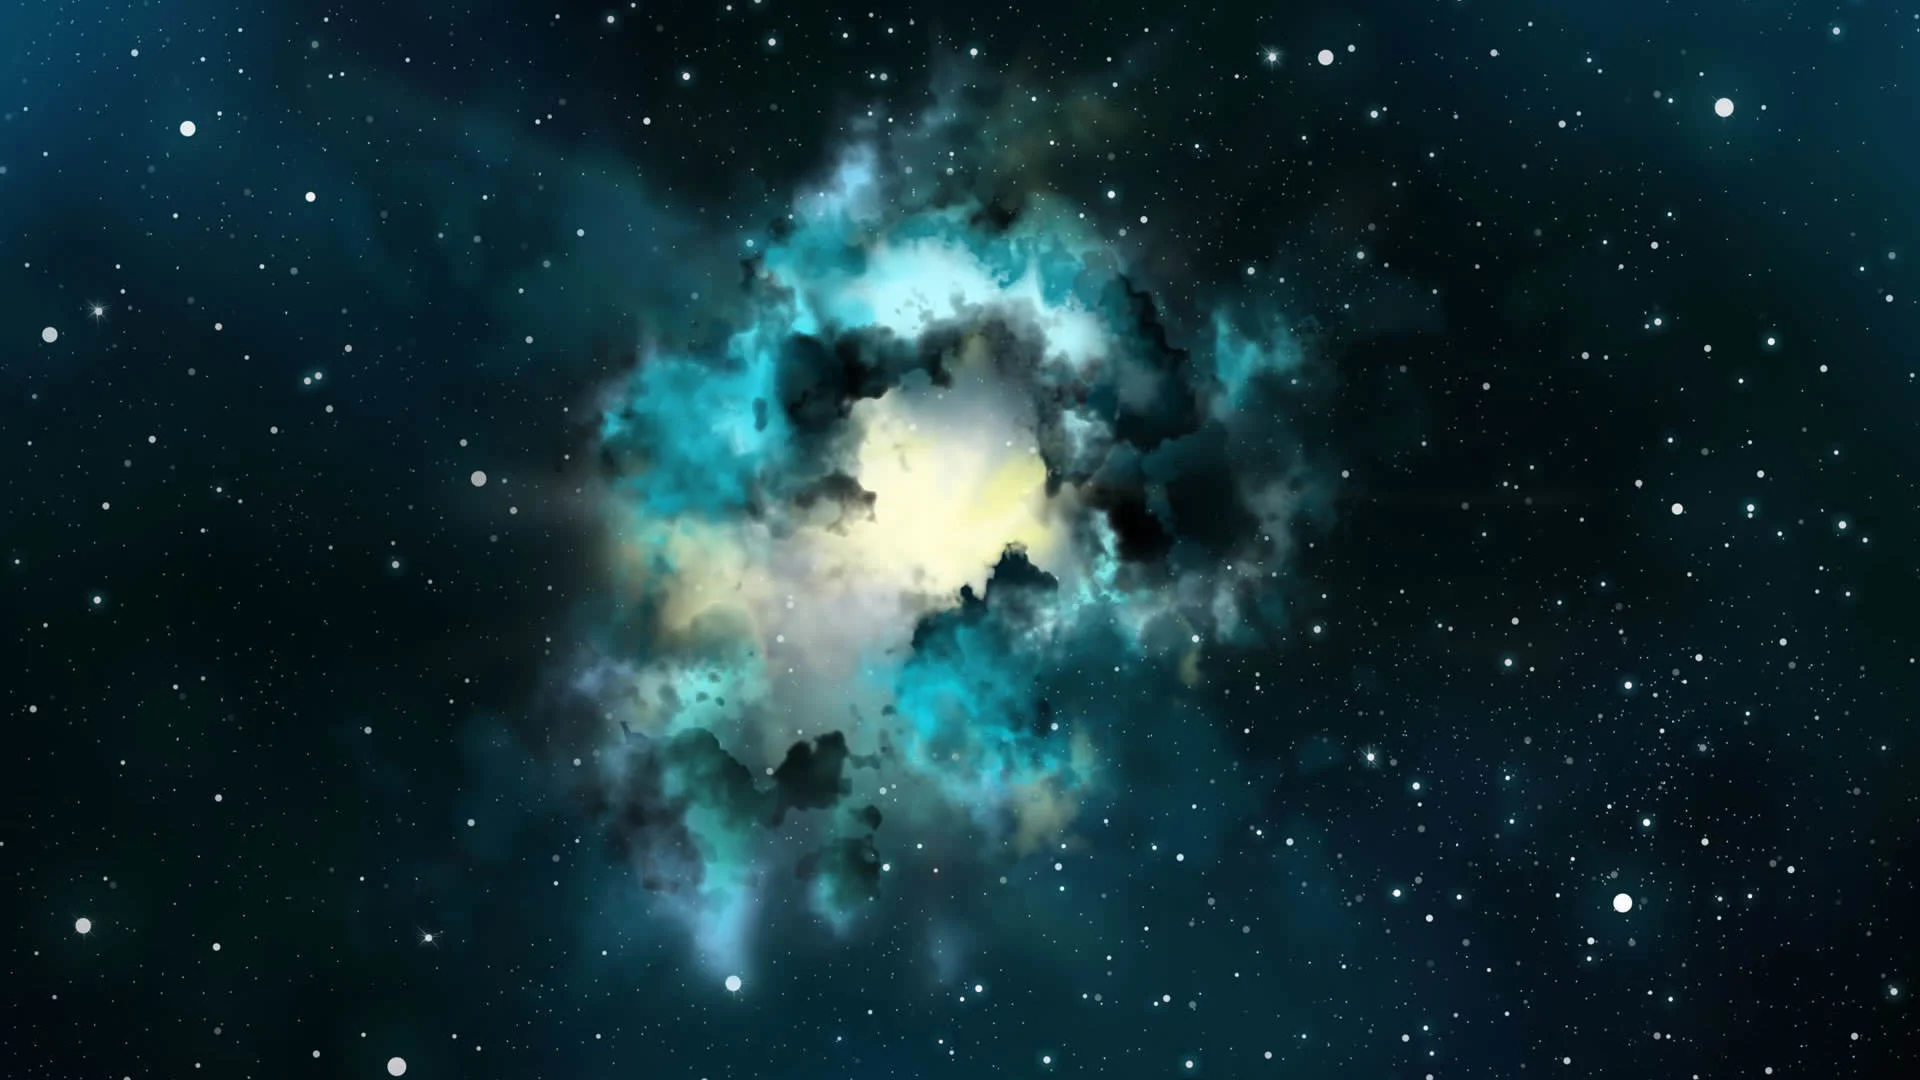 Outer Space Wallpapers - Top 35 Best Outer Space Backgrounds Download